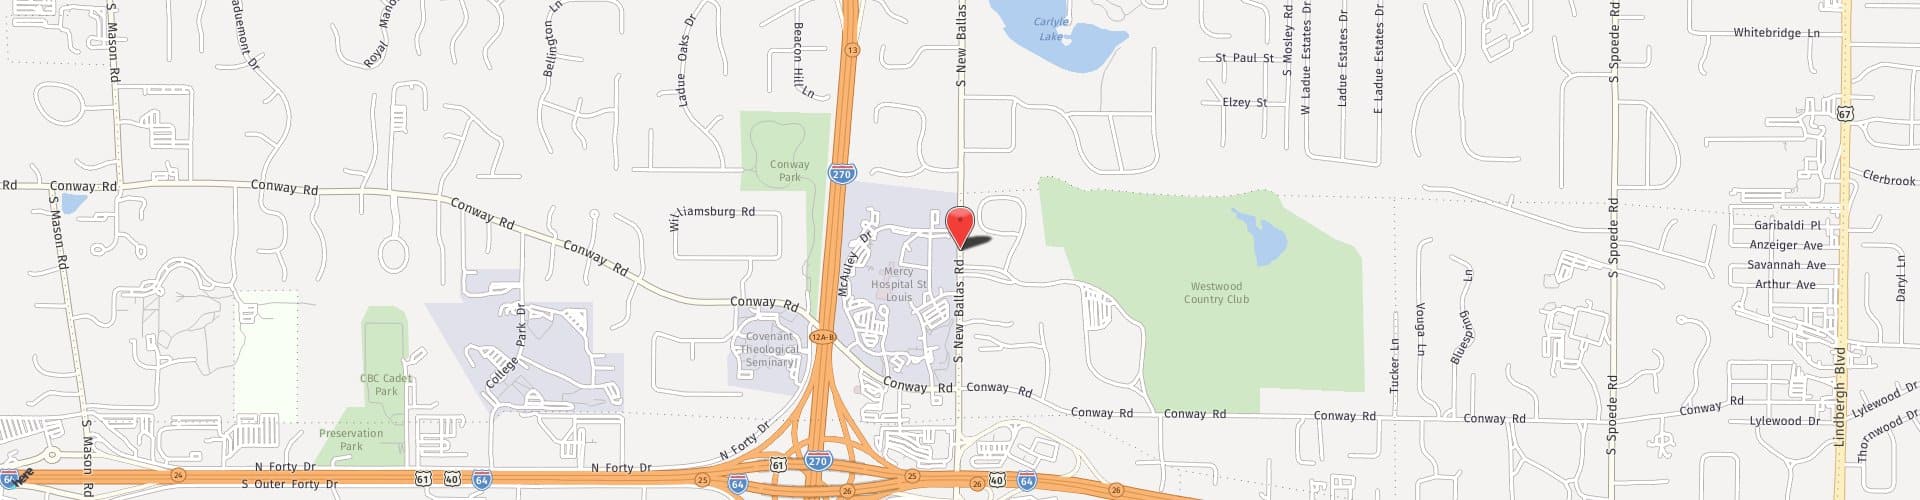 Location Map: 621 S. New Ballas Rd. St. Louis, MO 63141